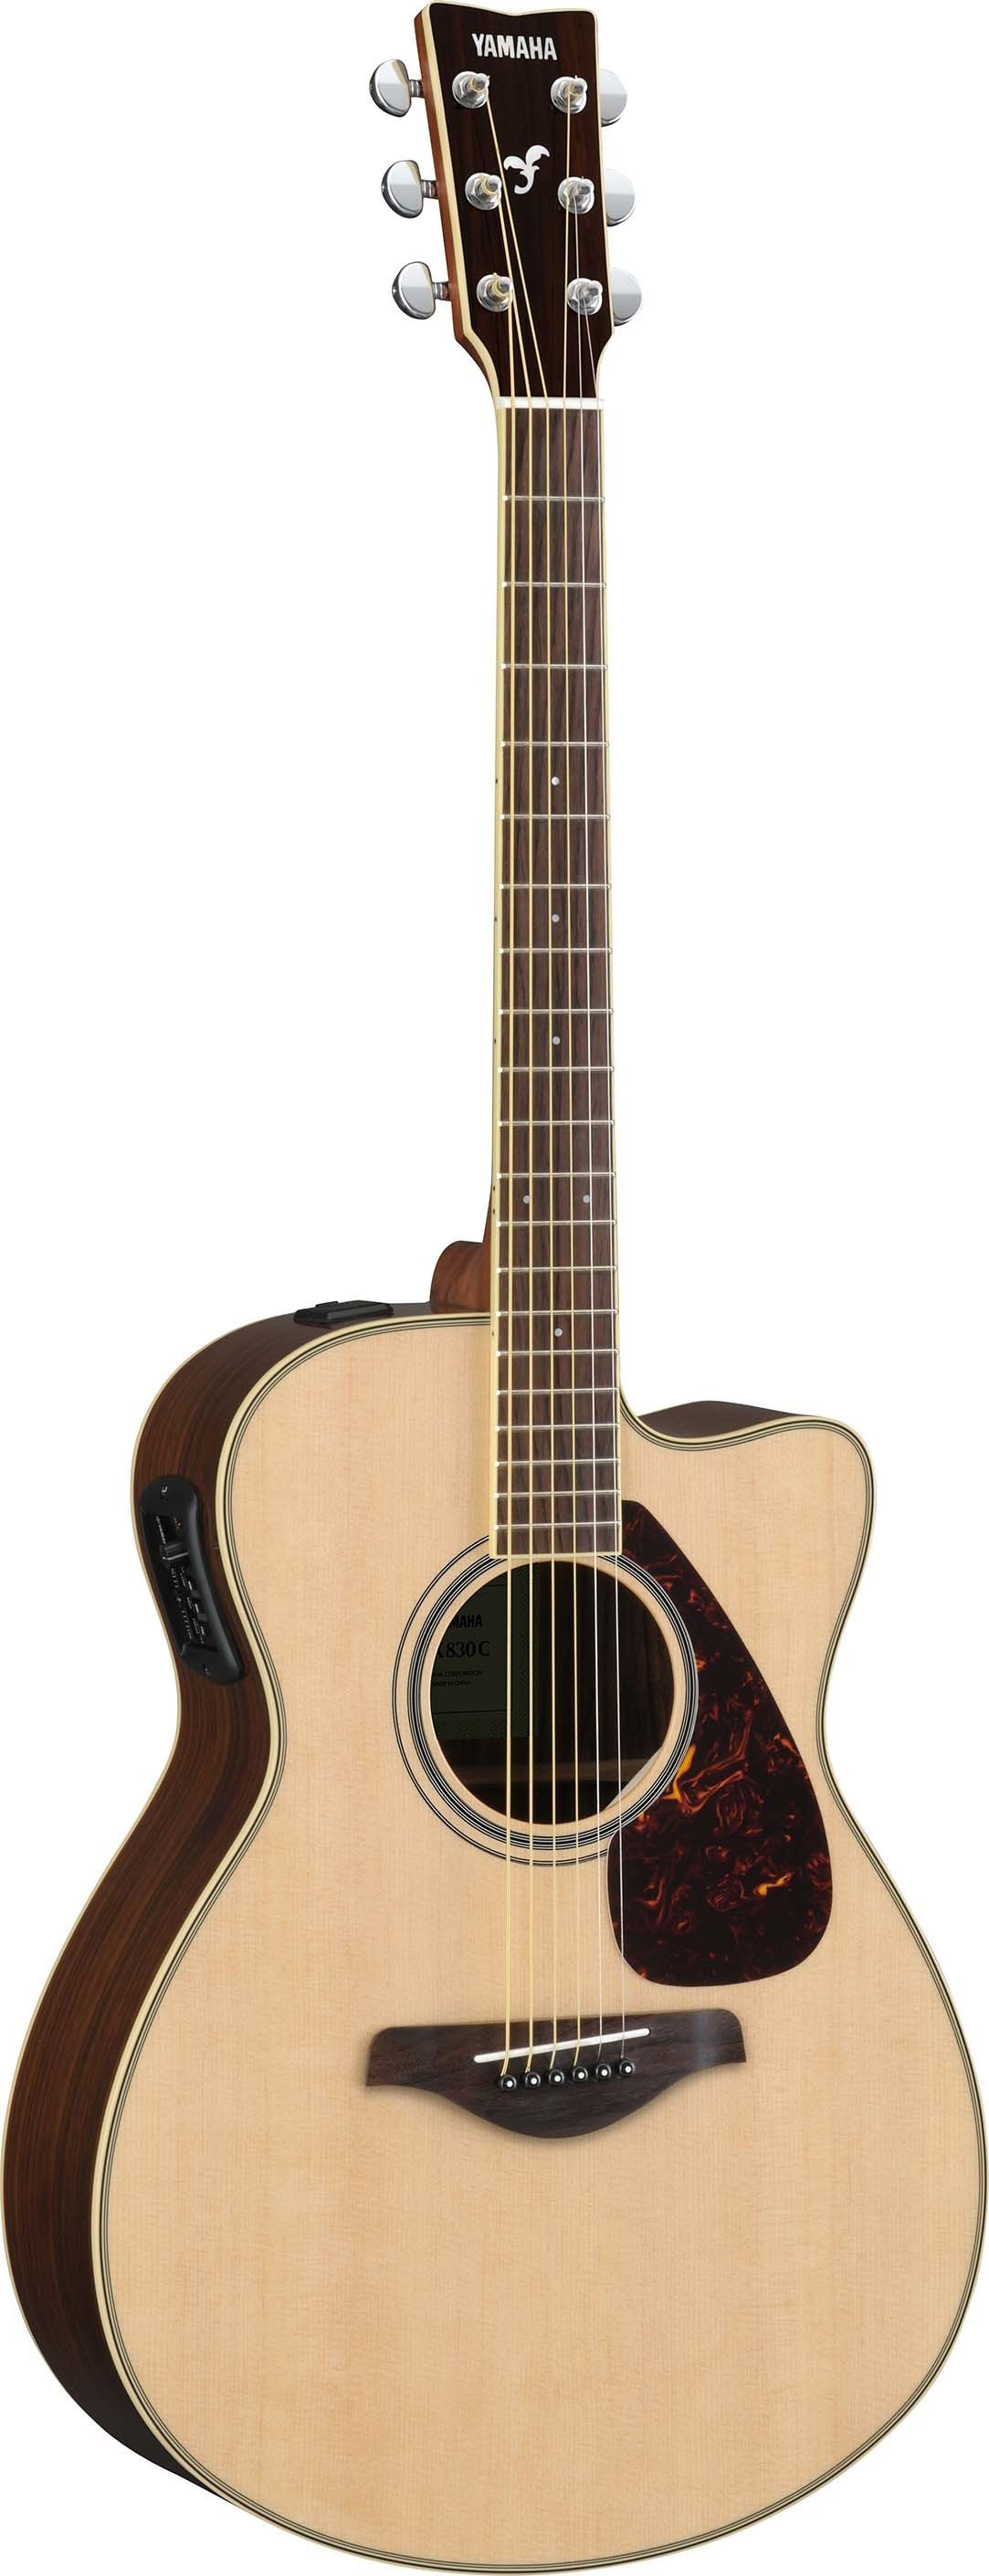 FG / FGX Series - Overview - FG Series - Acoustic Guitars 